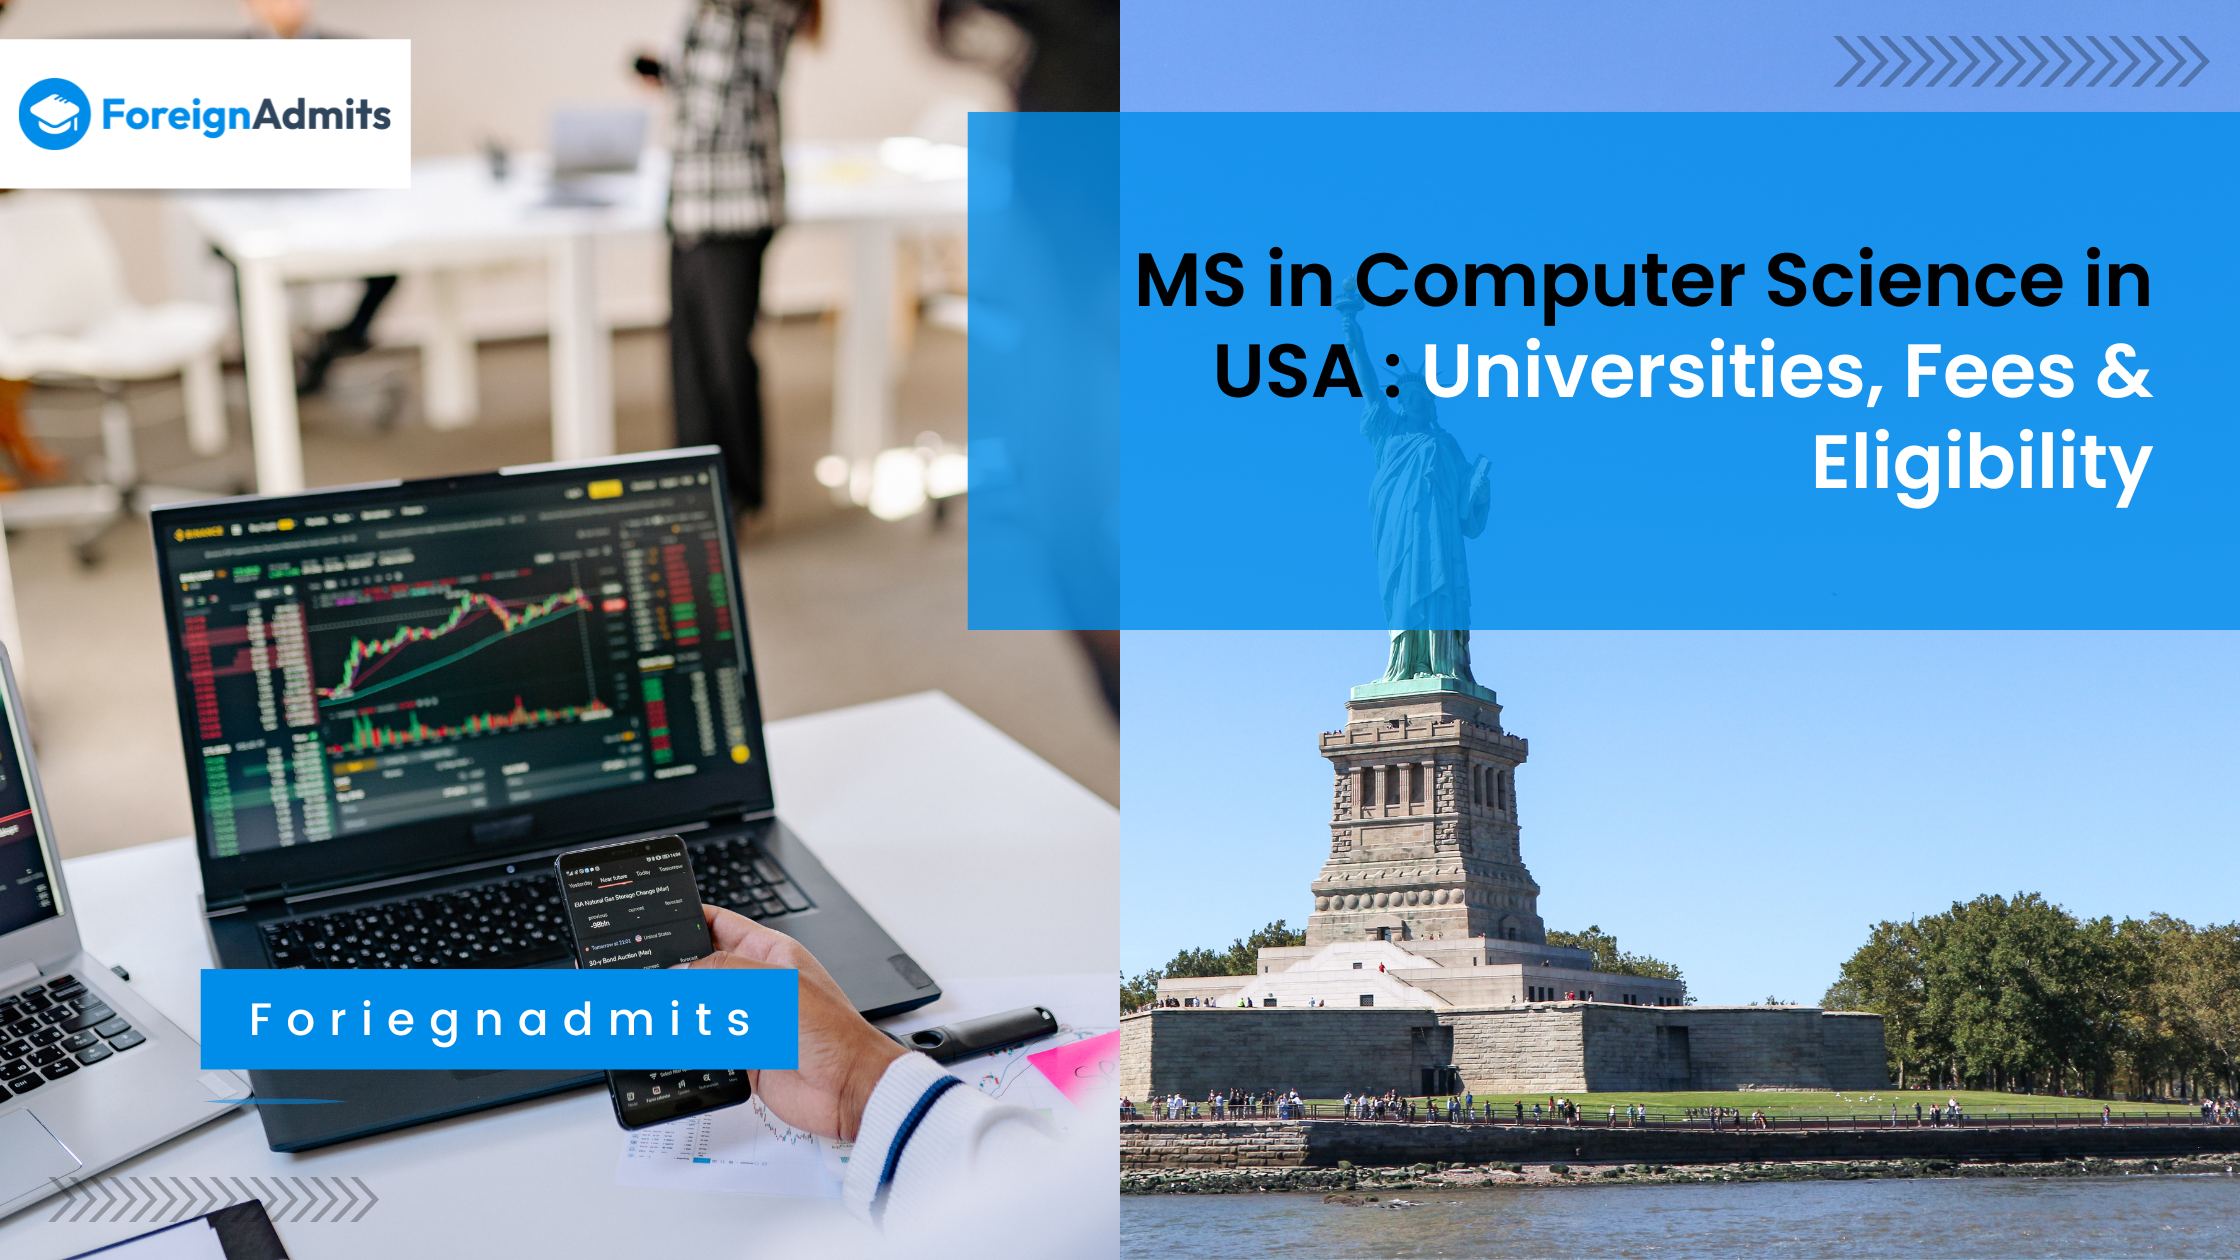 MS in Computer Science in USA: Universities, Fees & Eligibility